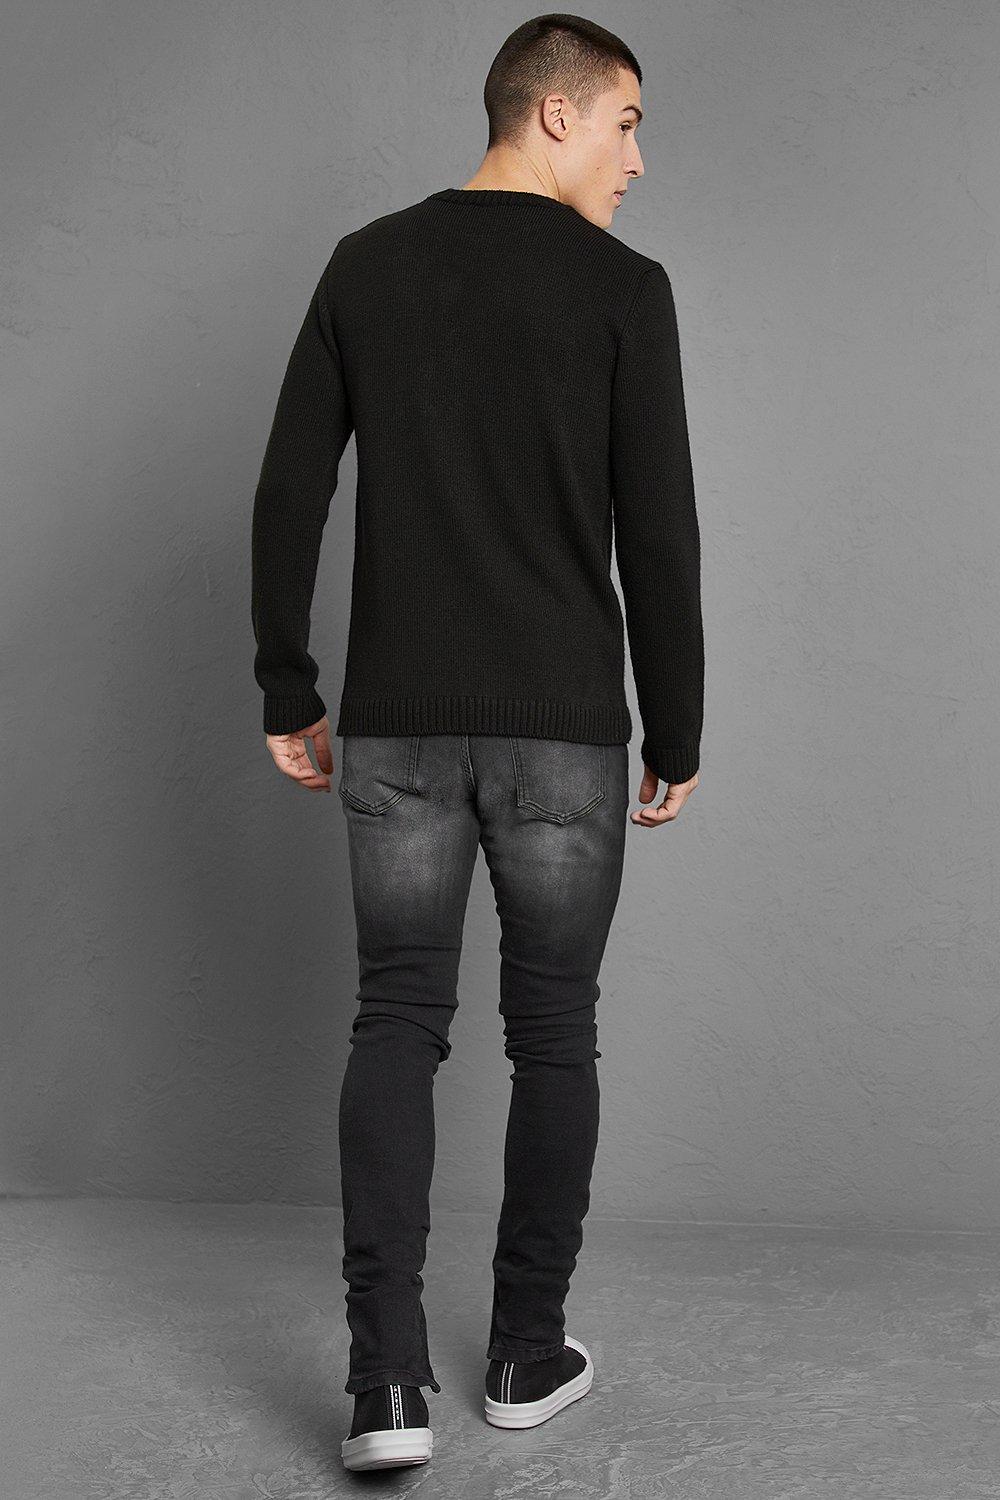 DTT slim fit extreme rip jeans in washed black, ASOS